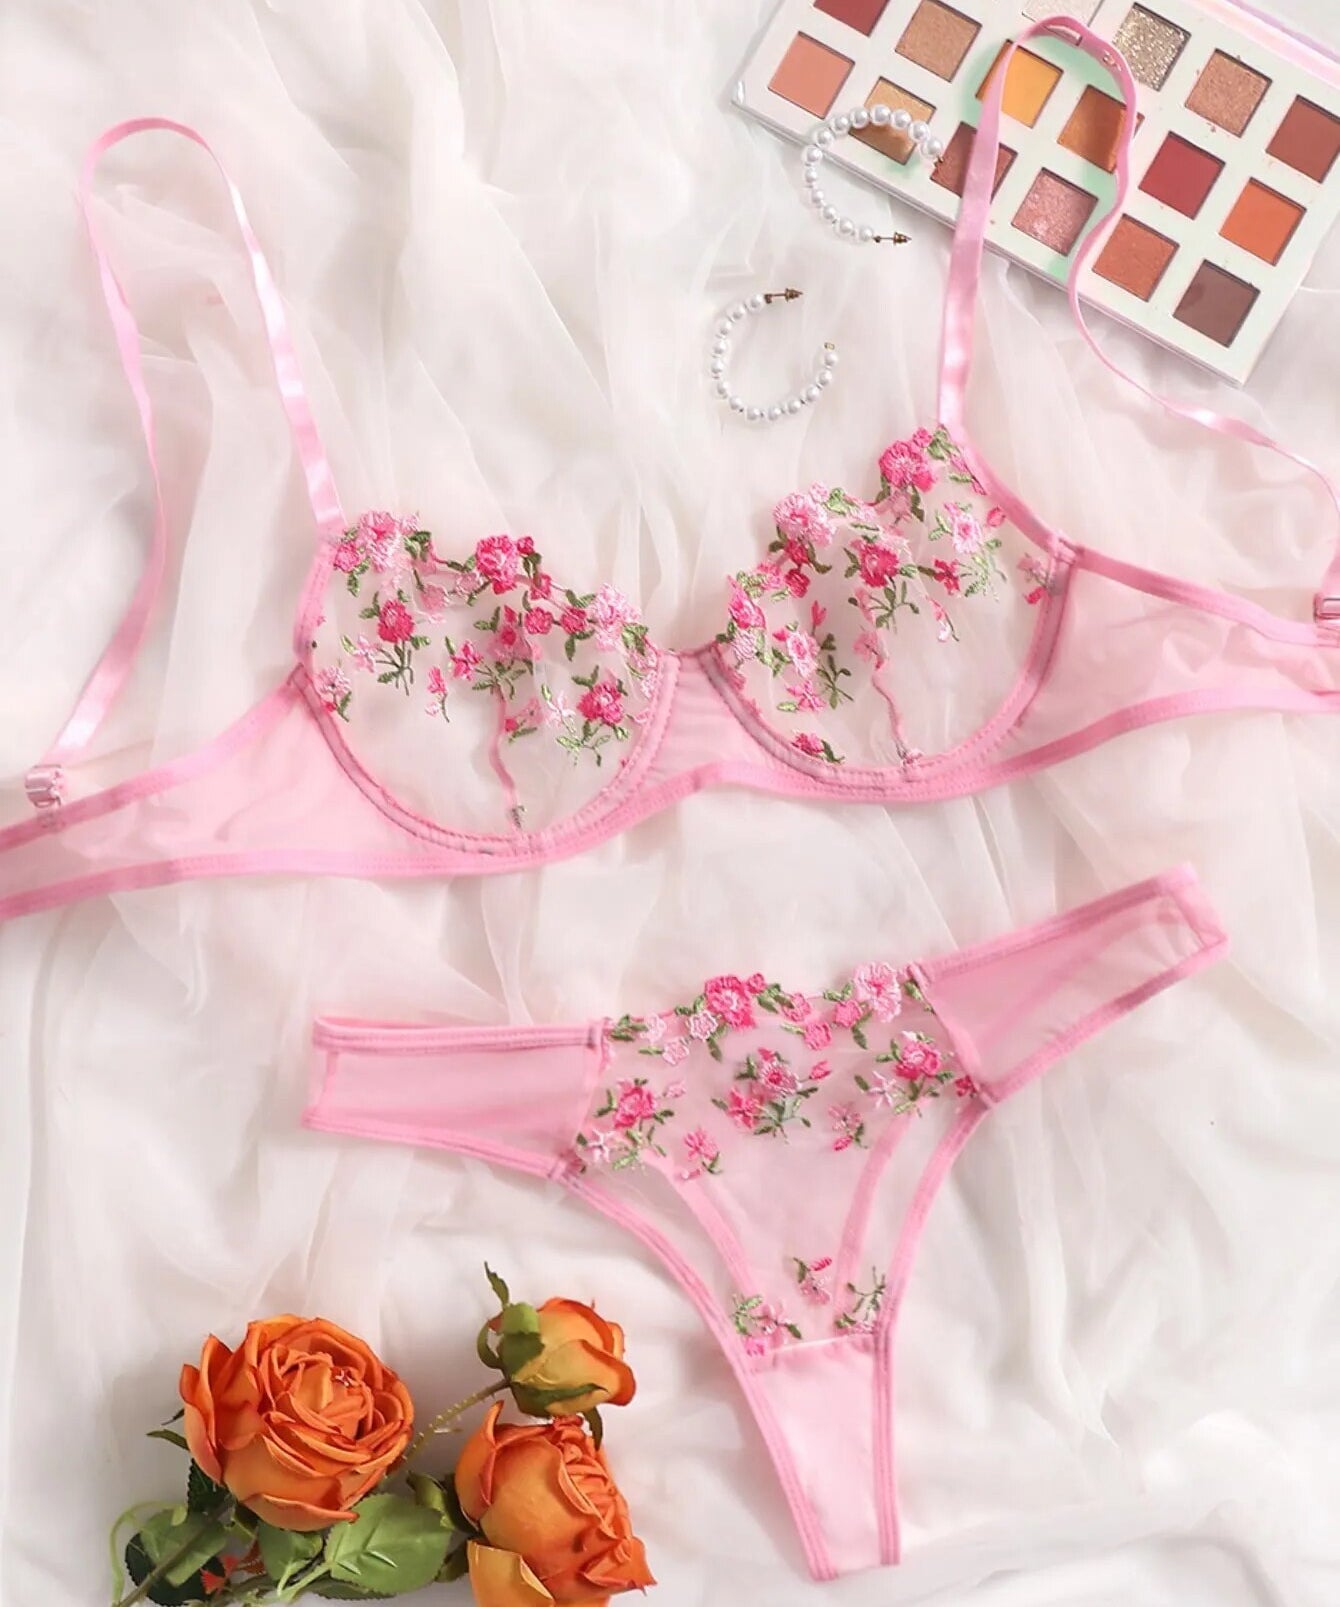 Floral Sexy Transparent Embroidery Lingerie Set